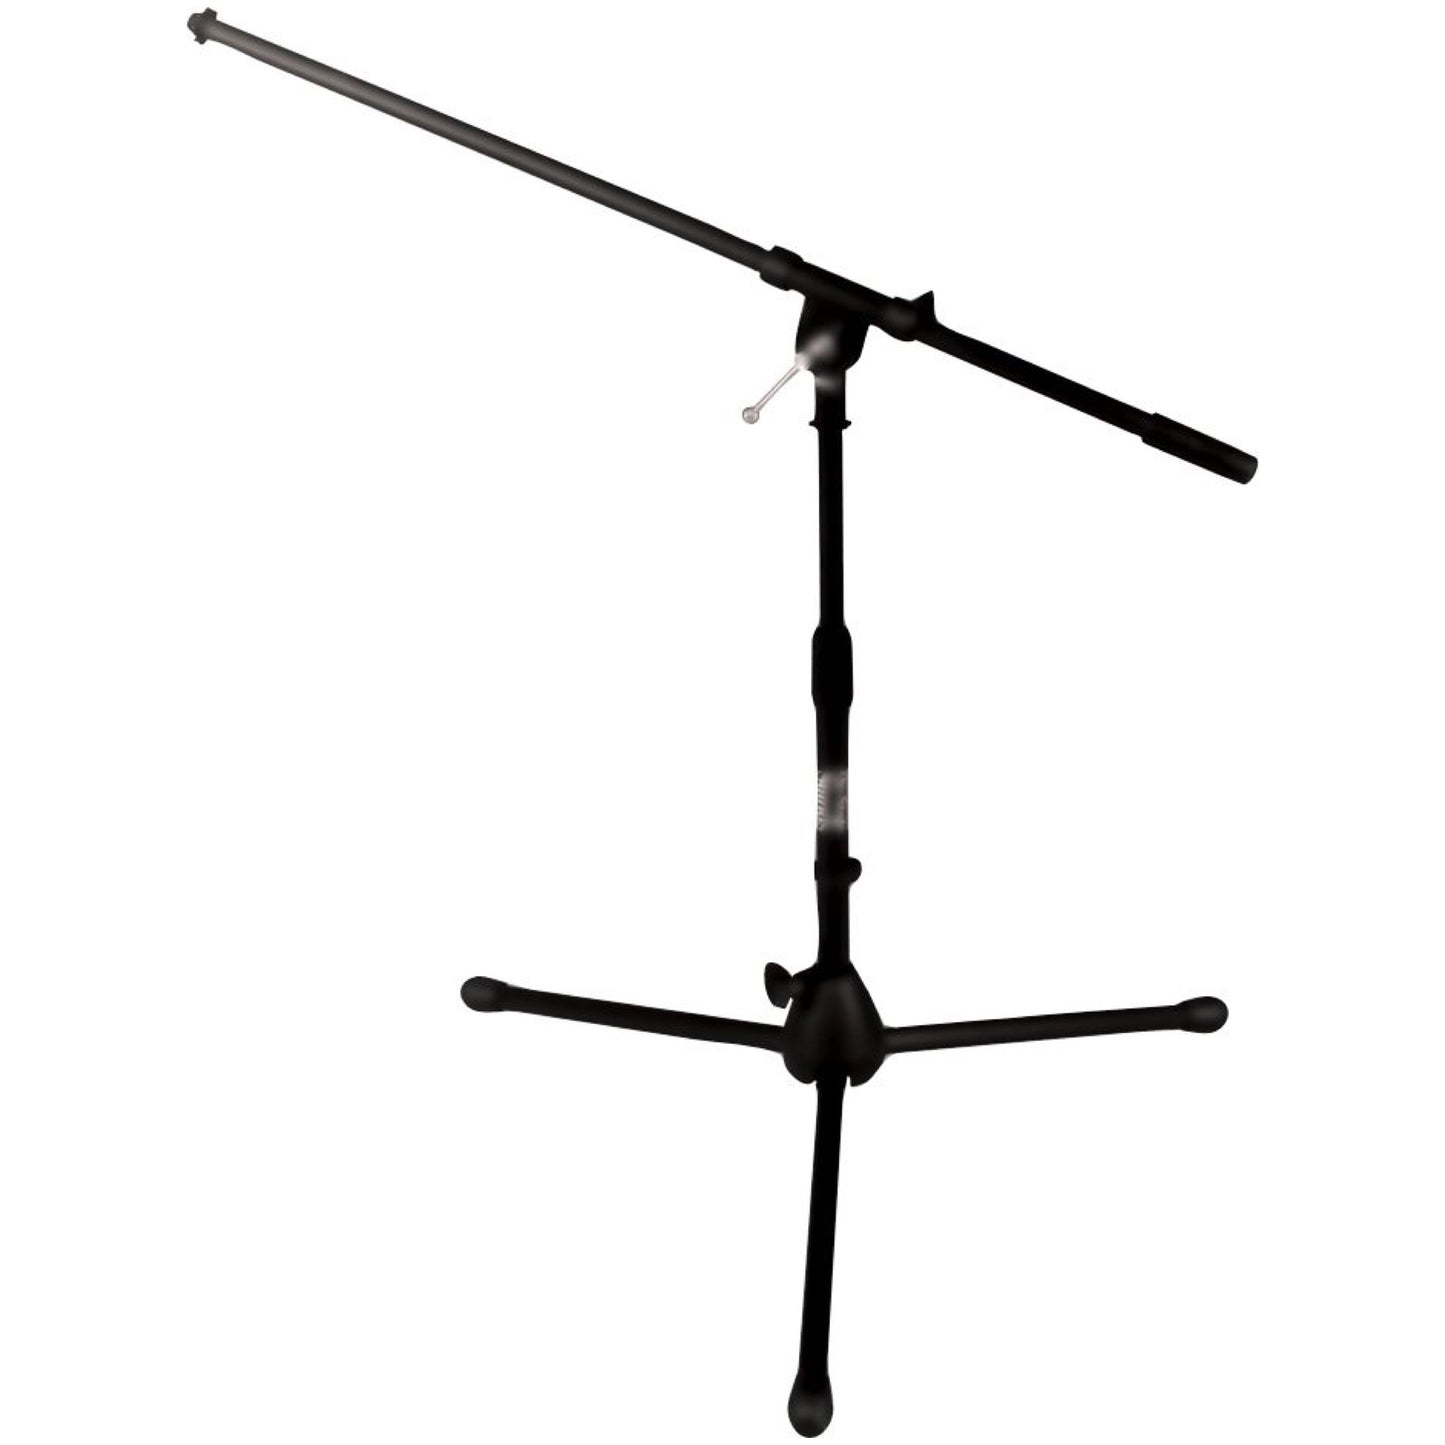 Shure DMK57-52 Drum Microphone Package (3 x SM57, 1 x Beta52, Case, Drum Mounts), with Tripod Stand and 4 Mic Cables (18.5 Foot)